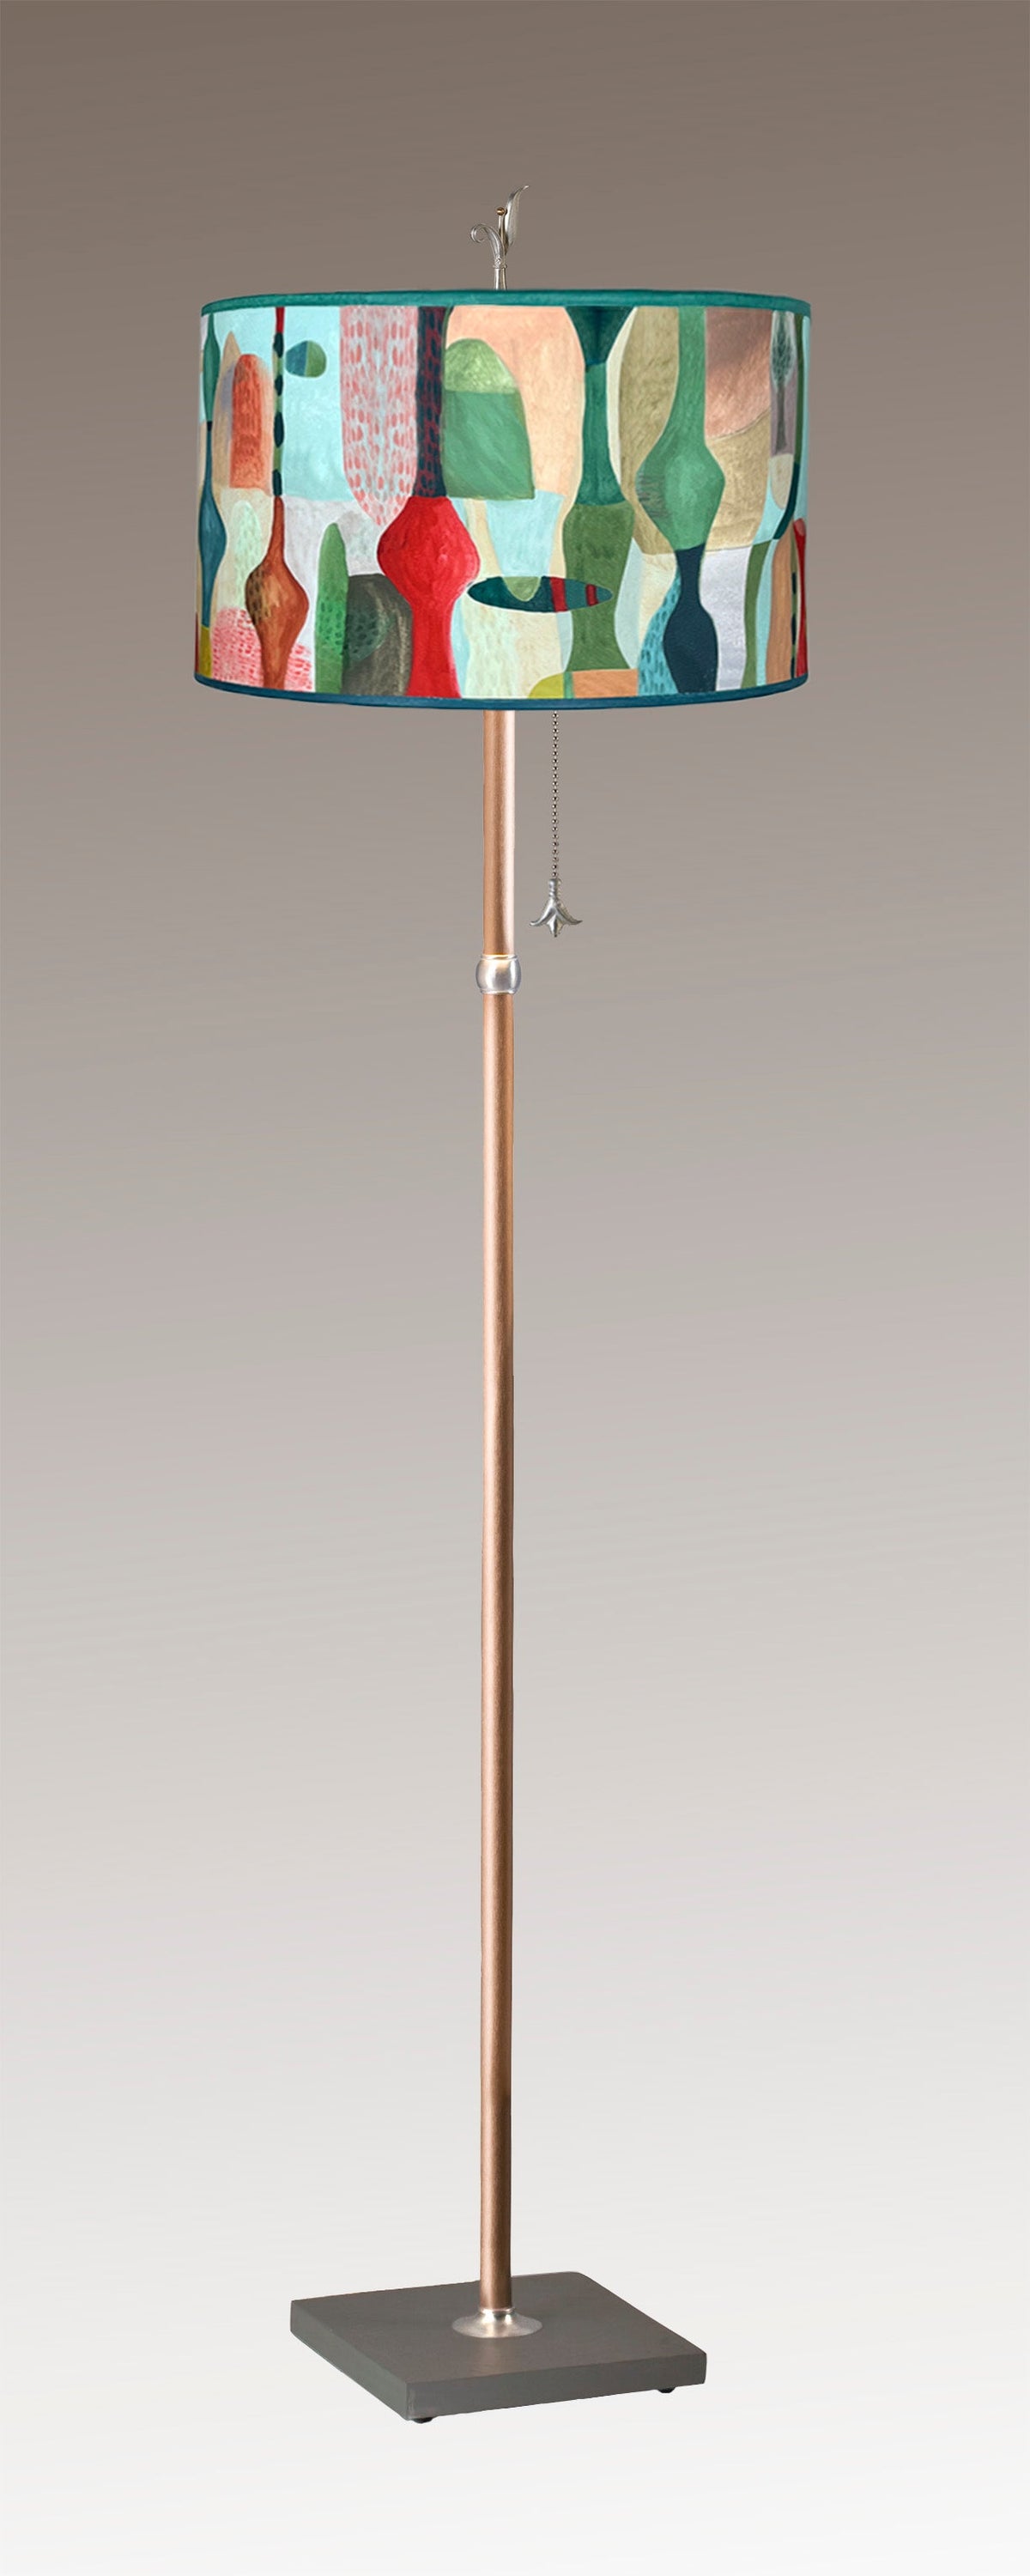 Janna Ugone &amp; Co Floor Lamp Copper Floor Lamp with Large Drum Shade in Riviera in Poppy